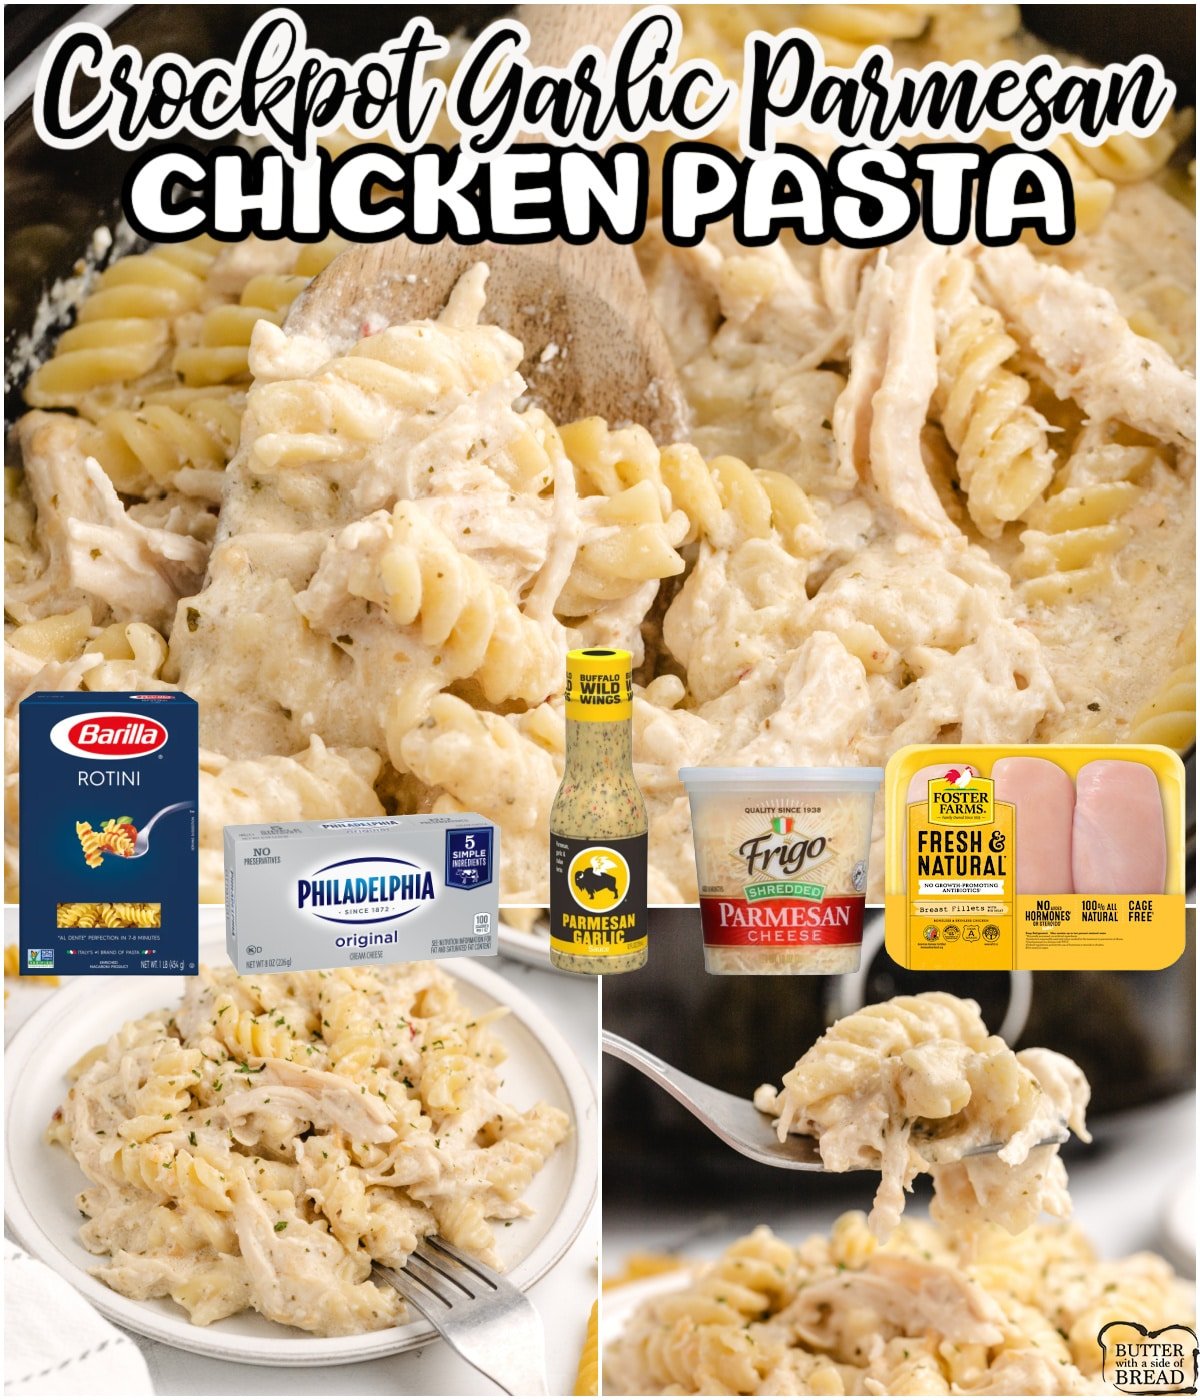 Crockpot Garlic Parmesan Chicken Pasta is made with 6 ingredients and only a few minutes of prep time. Easy weeknight dinner recipe that everyone loves! 